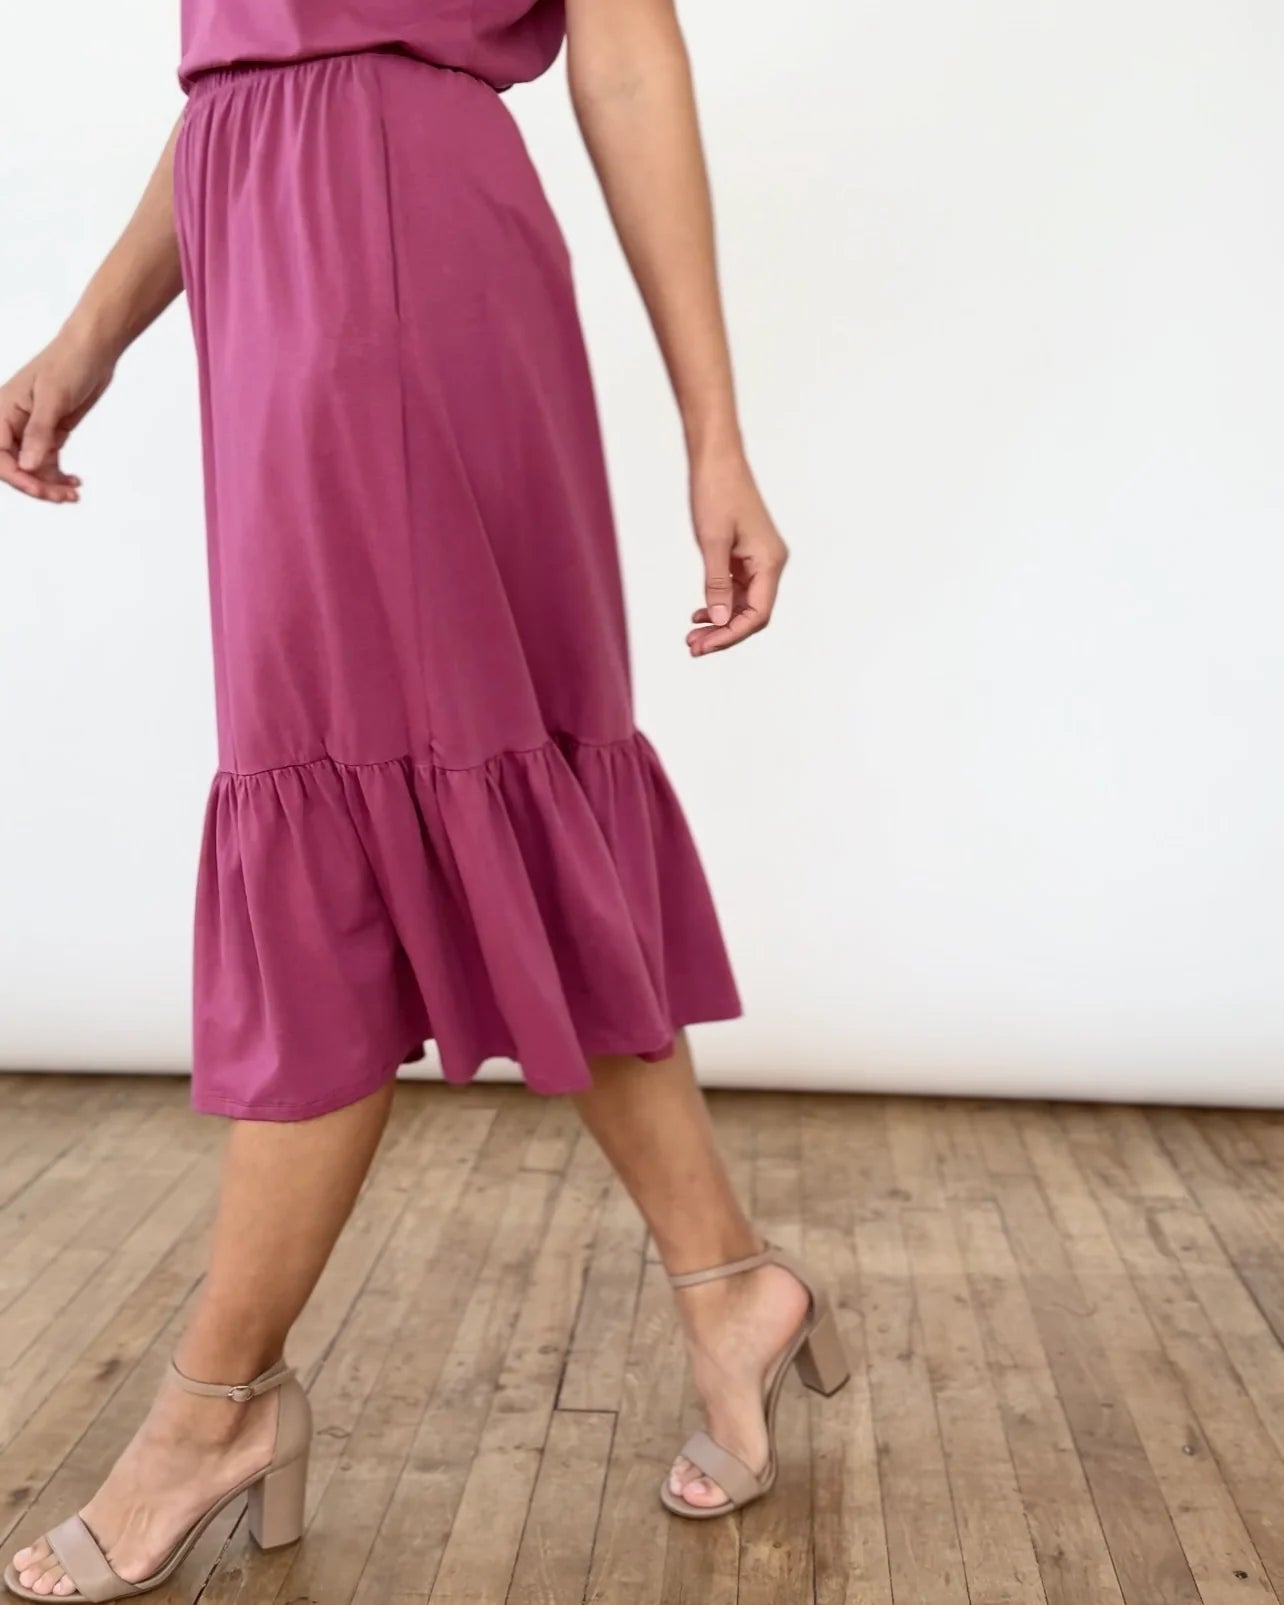 Tiered Ruffled Skirt Apex Ethical BoutiqueTiered Ruffled Skirt Apex Ethical Boutique